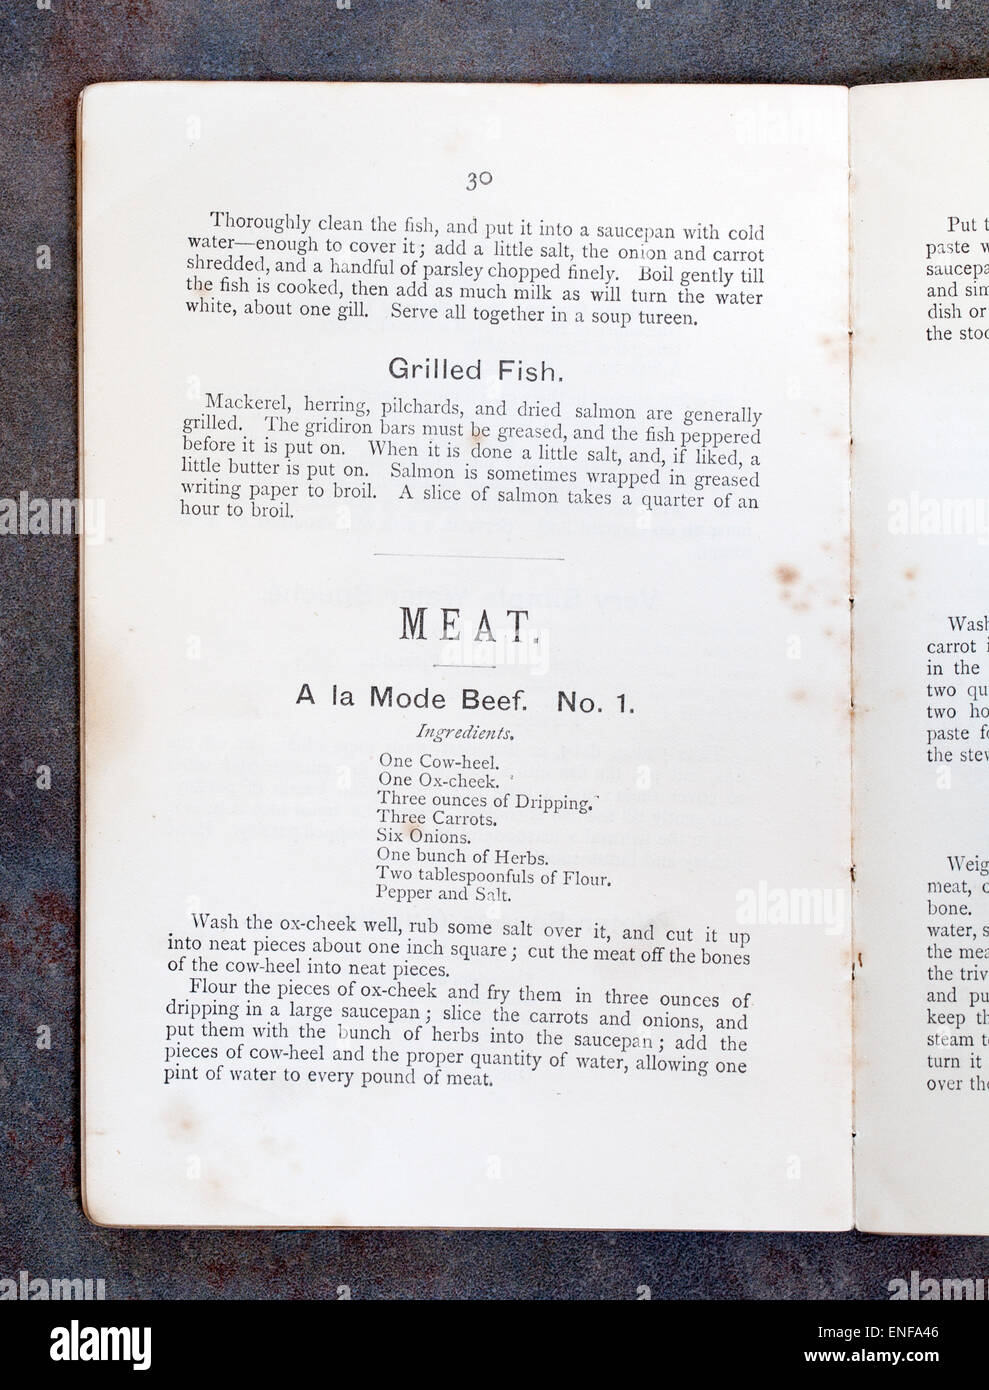 Recipes from Plain Cookery Recipes Book by Mrs Charles Clarke for the National Training School for Cookery Stock Photo